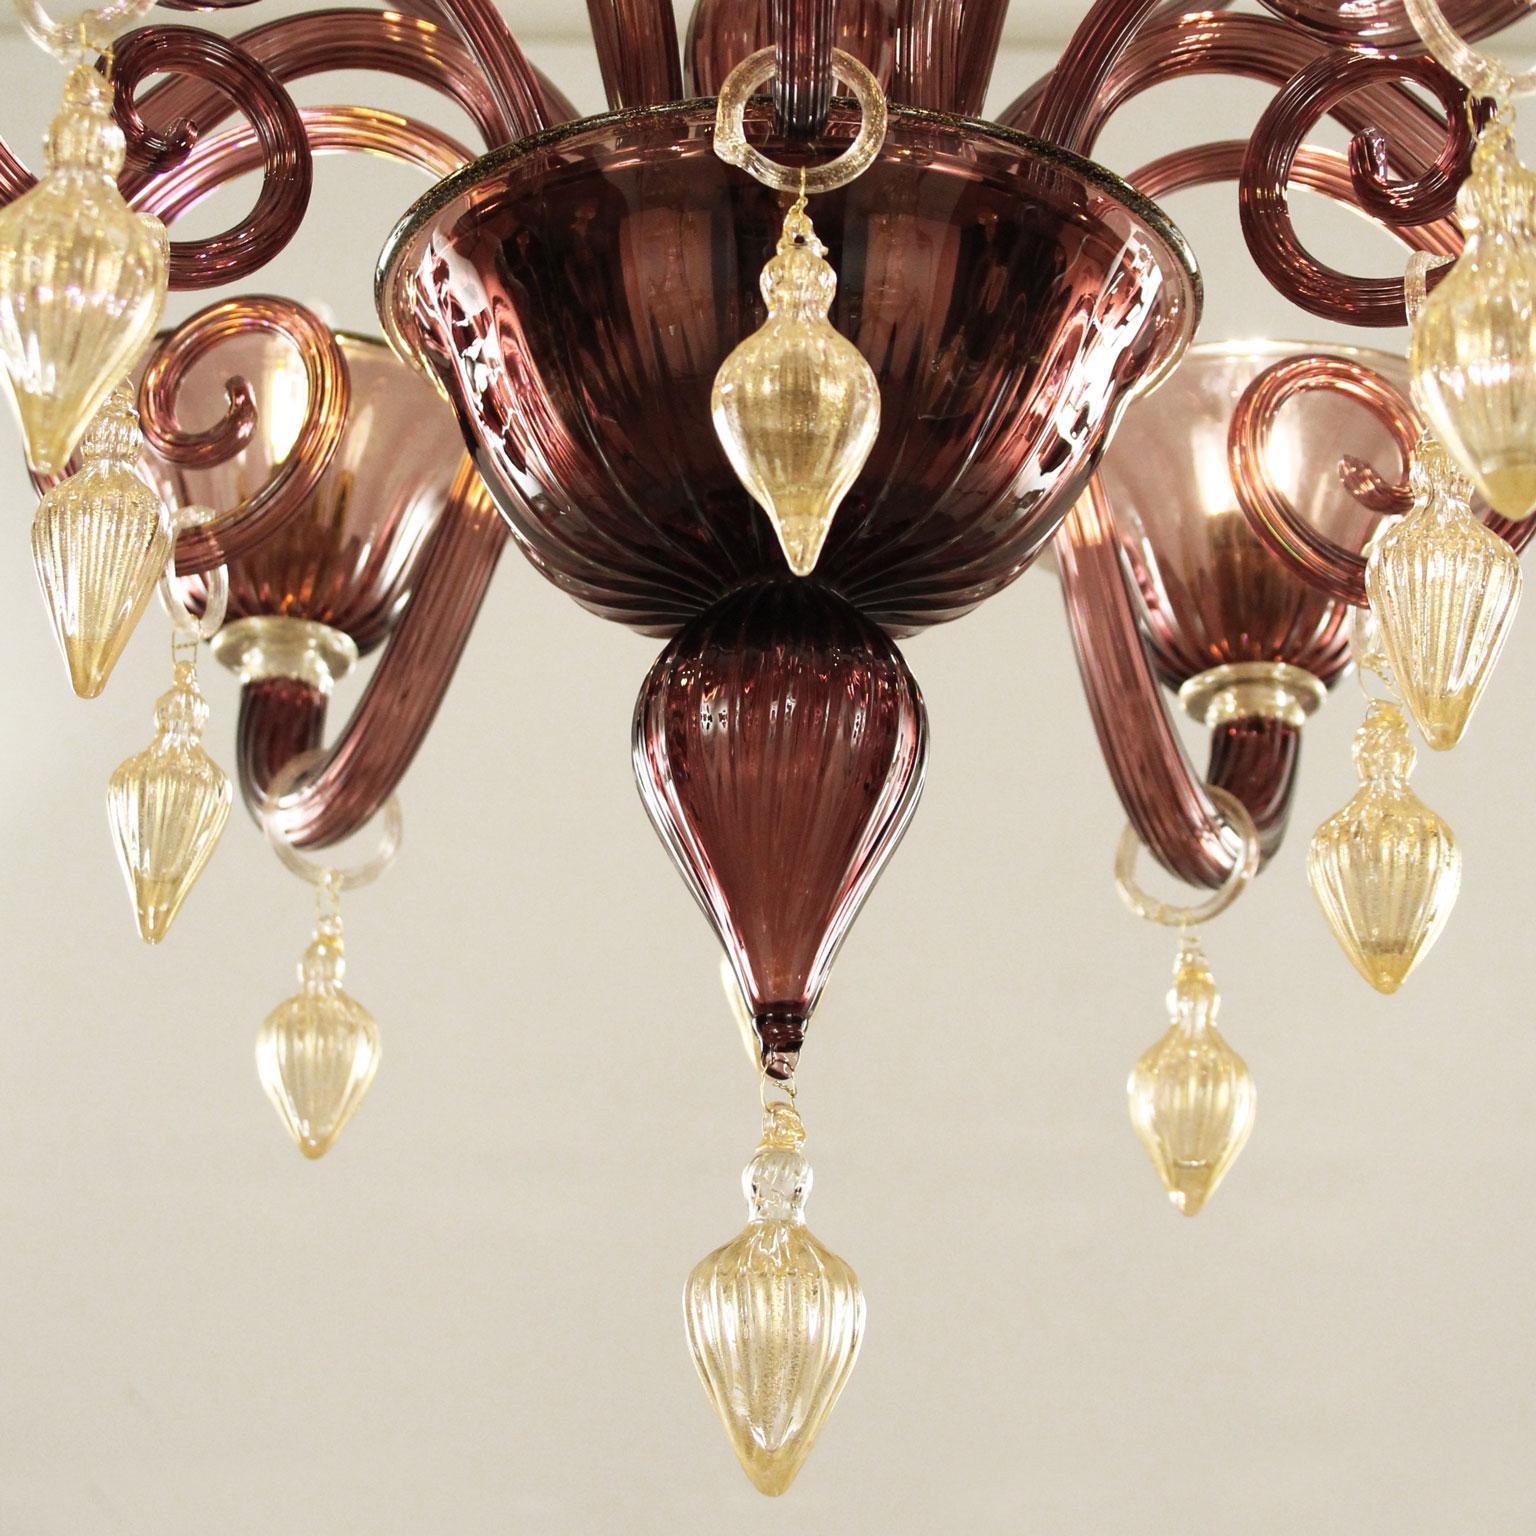 Americano chandelier with 6 lights. Dark amethyst Murano glass, gold pendants. Ivory cotton lampshades by Multiforme

The blown glass chandelier Americano is an elegant and luxurious Murano glass lighting fixture. The texture of the glass surface is